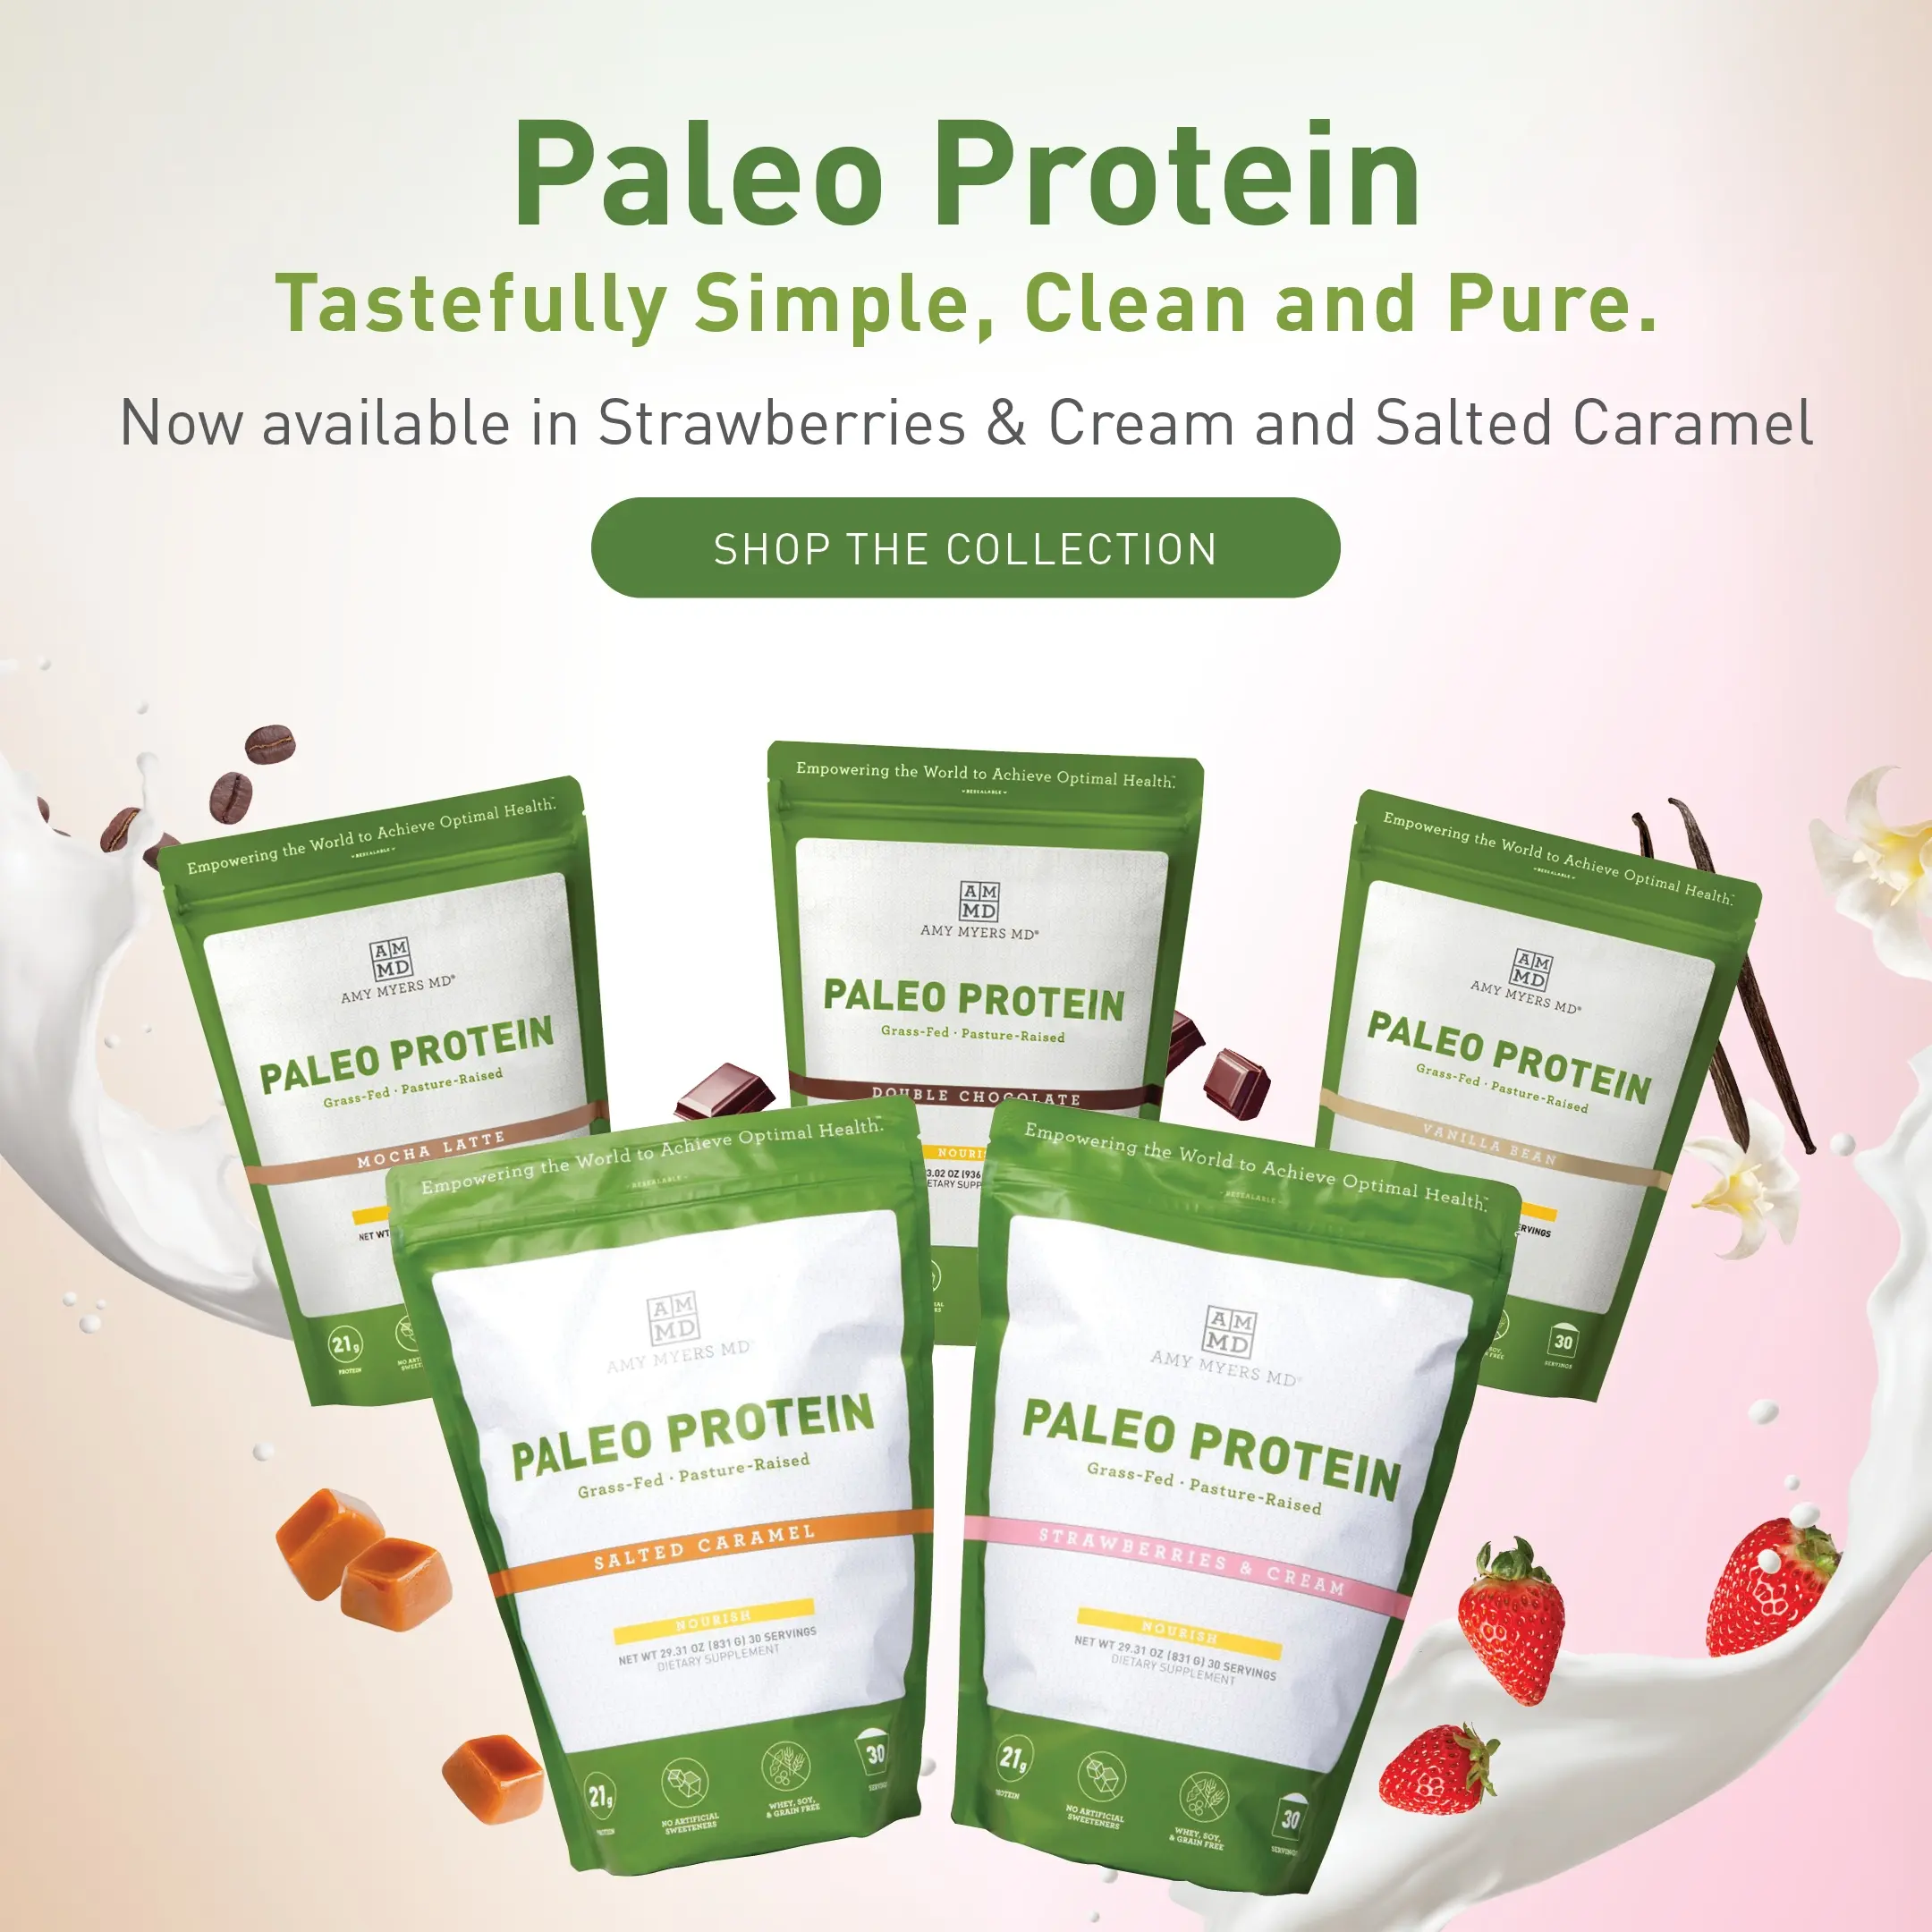 Paleo Protein - Tastefully Simple, Clean and Pure. Now available in Strawberries & Cream and Salted Caramel. Shop now.